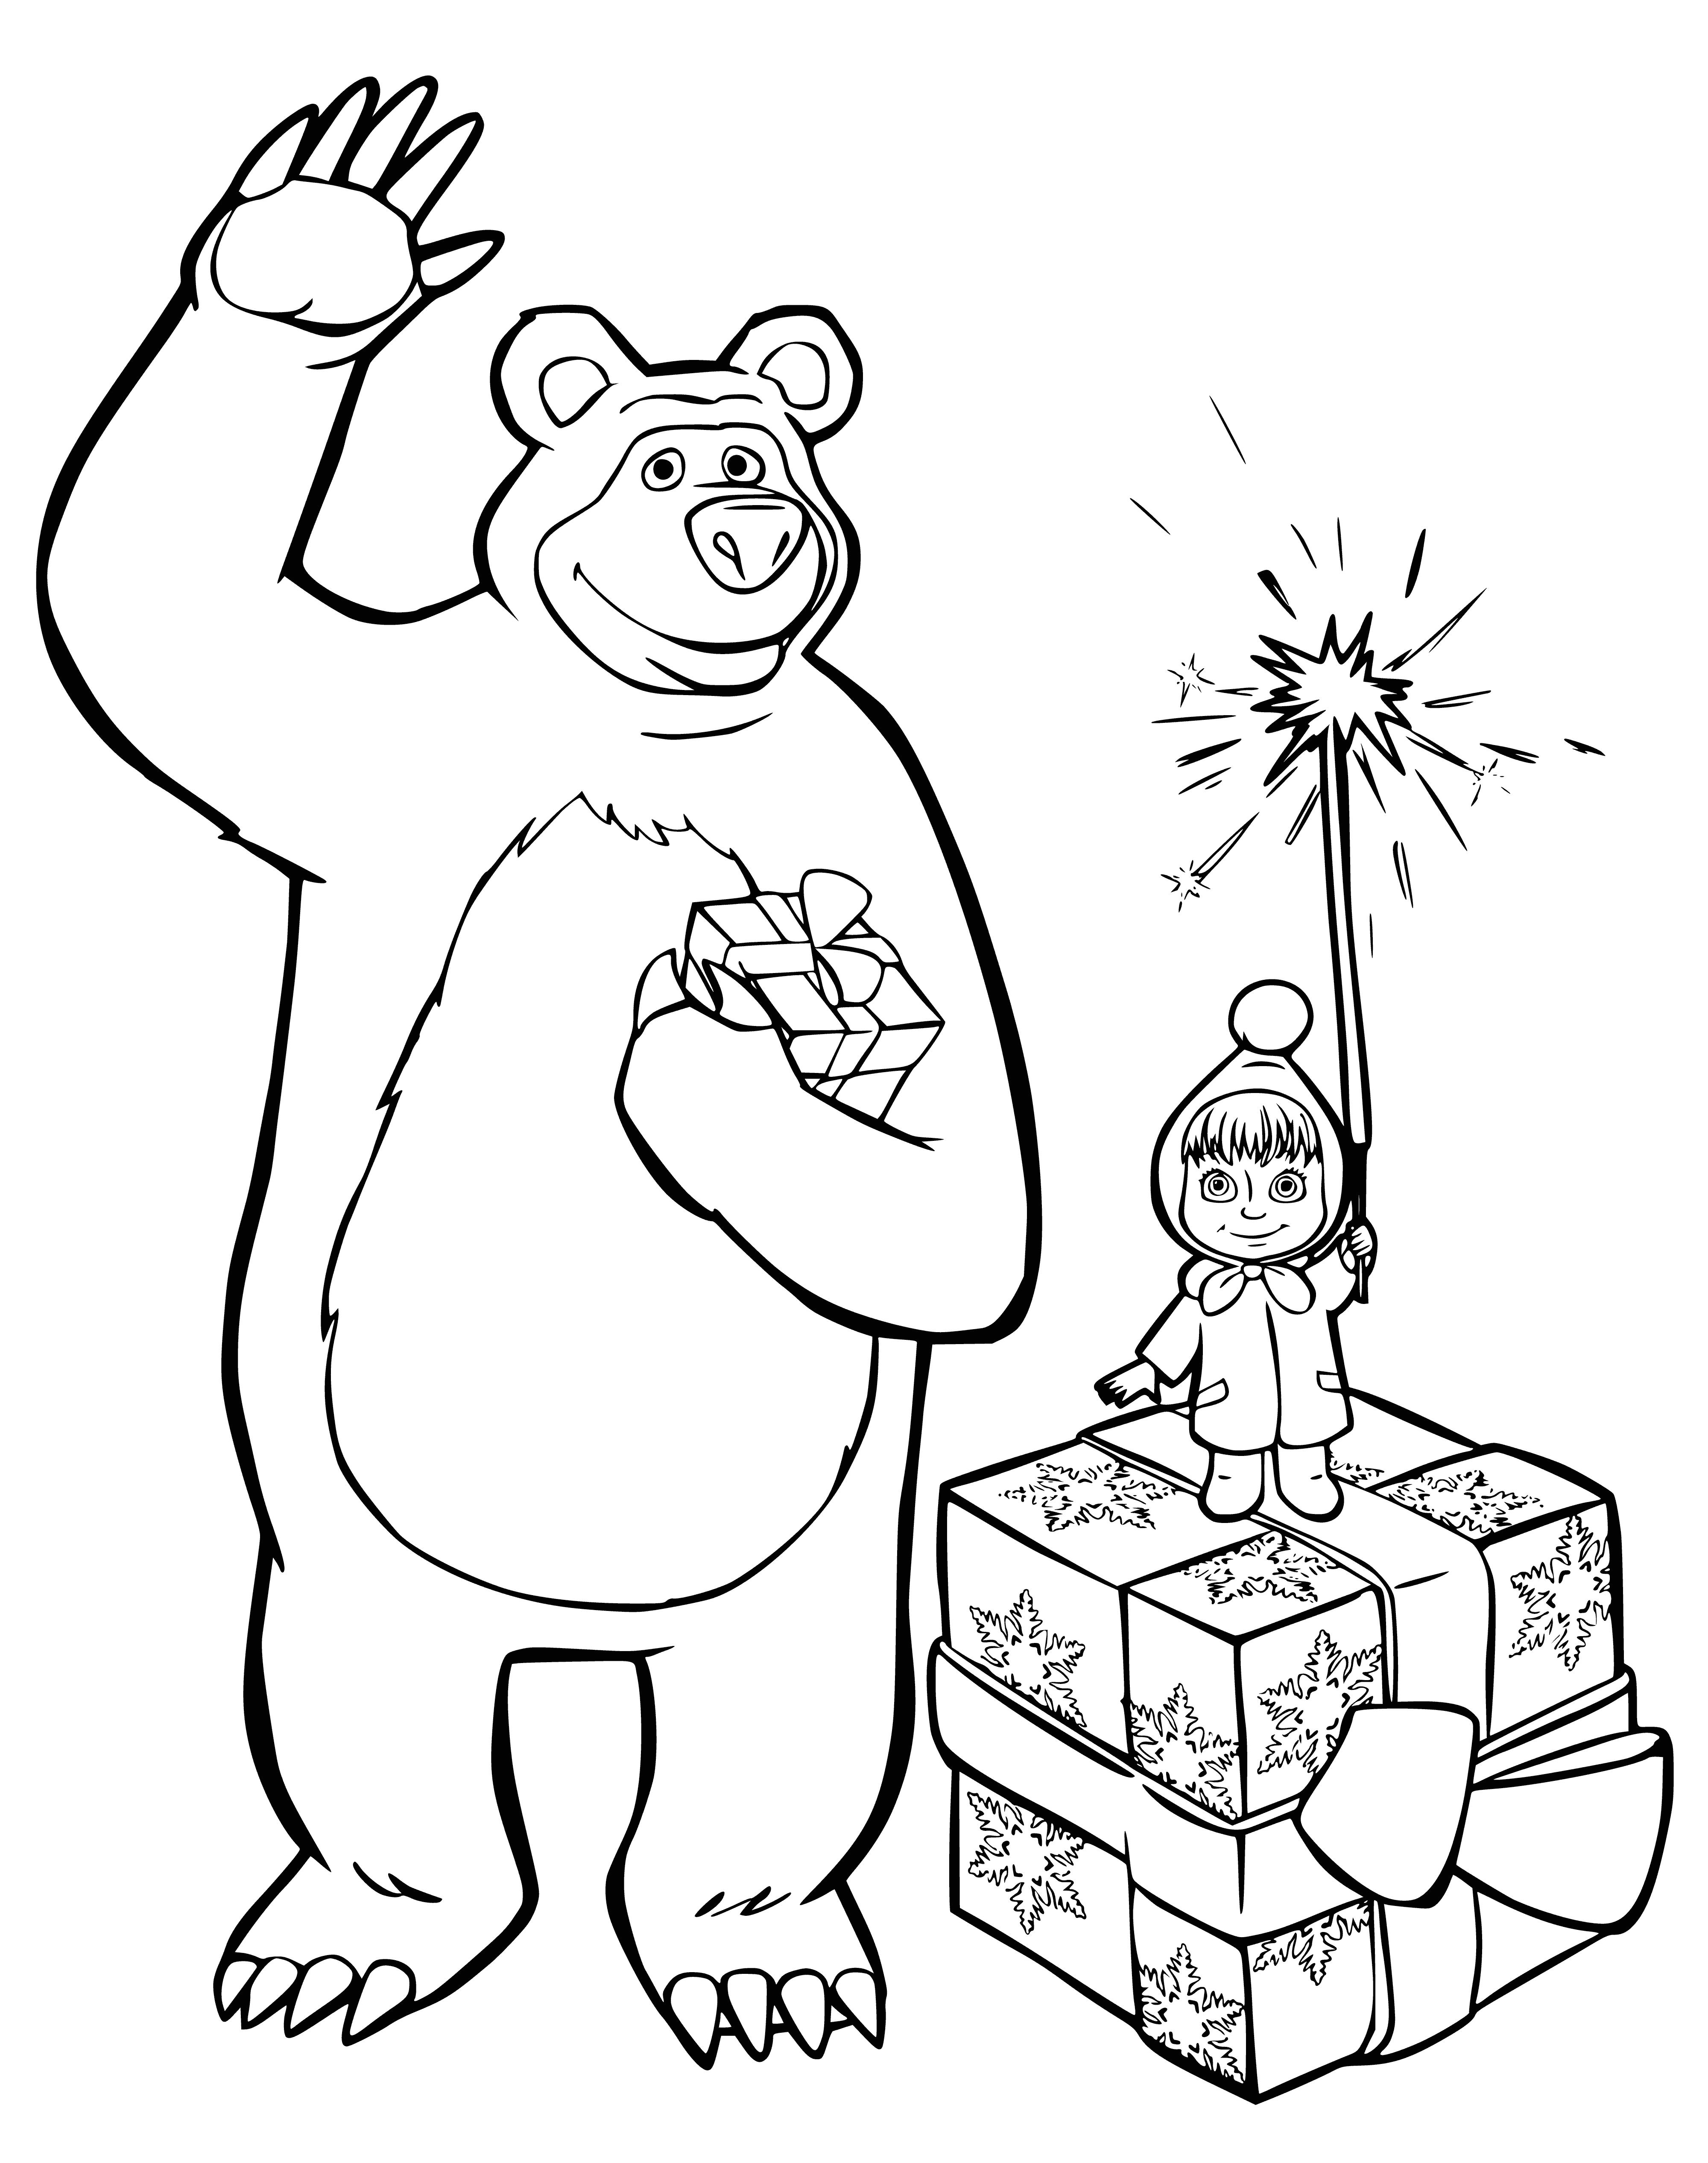 coloring page: Girl in purple dress hugs brown bear, both smiling in front of a Christmas tree with presents.